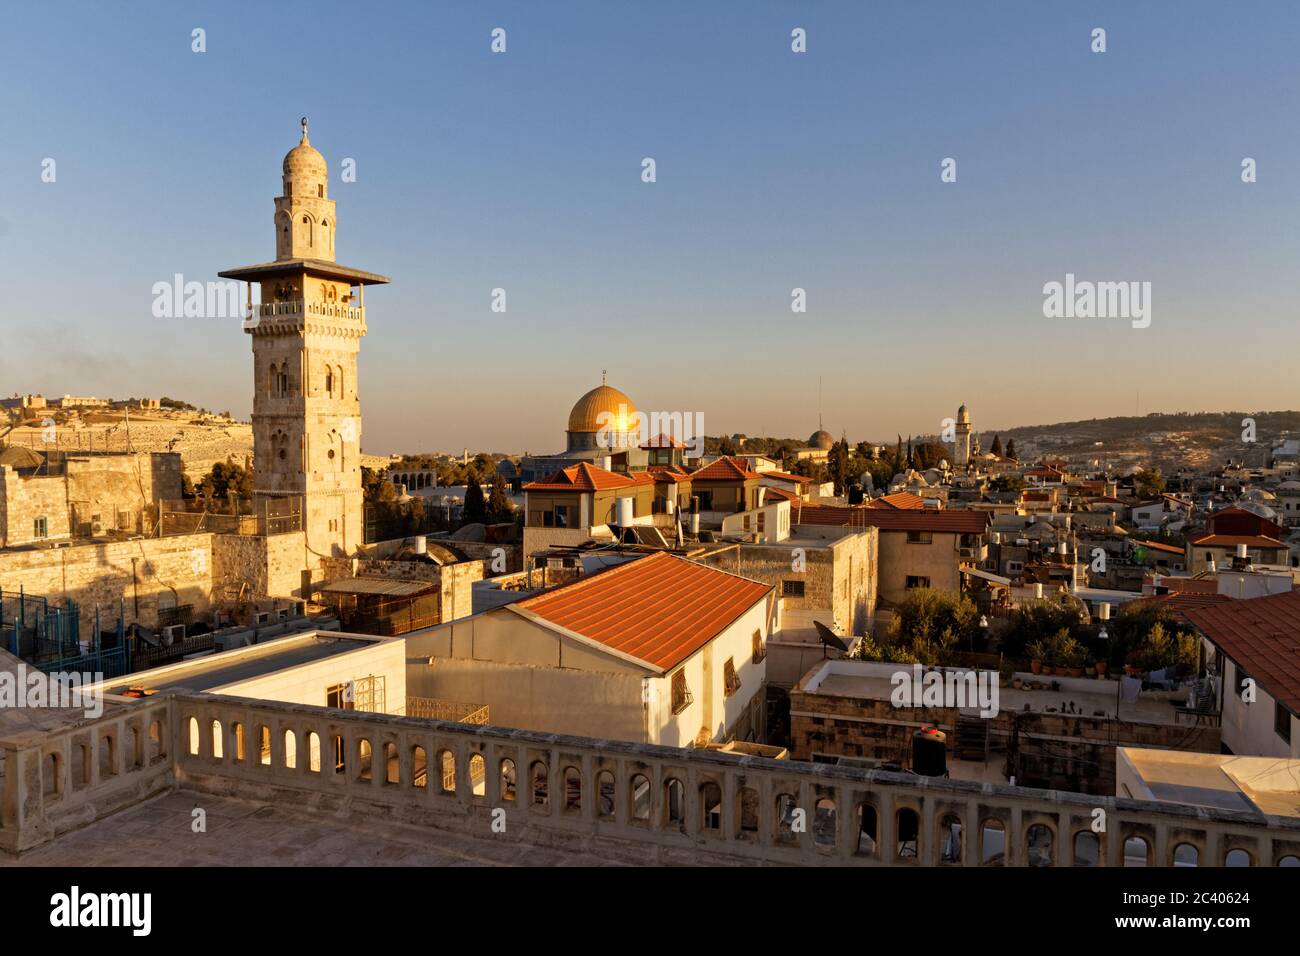 Sunset view old City of Jerusalem from Ecce homo pilgrim house Roof, via Dolorosa street. El-Ghawanima Tower and Al Aqsa Mosque, Dome of the Rock. Stock Photo